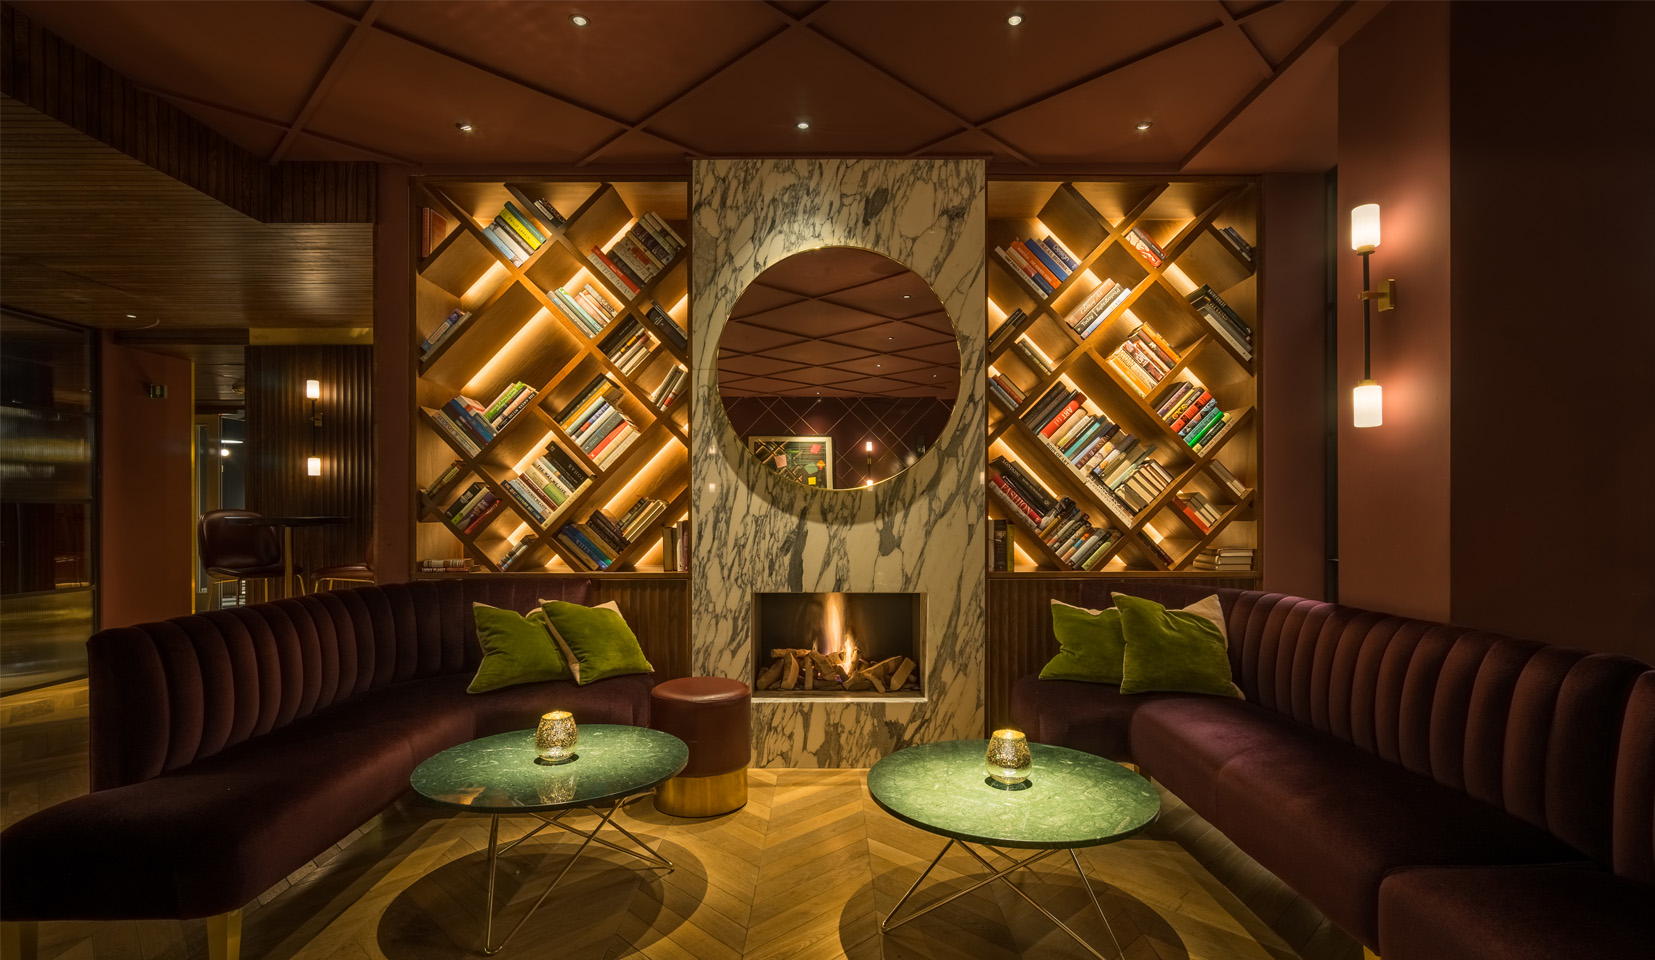 lit shelving units either side of fireplace in cosy bar with sofas and coffee tables